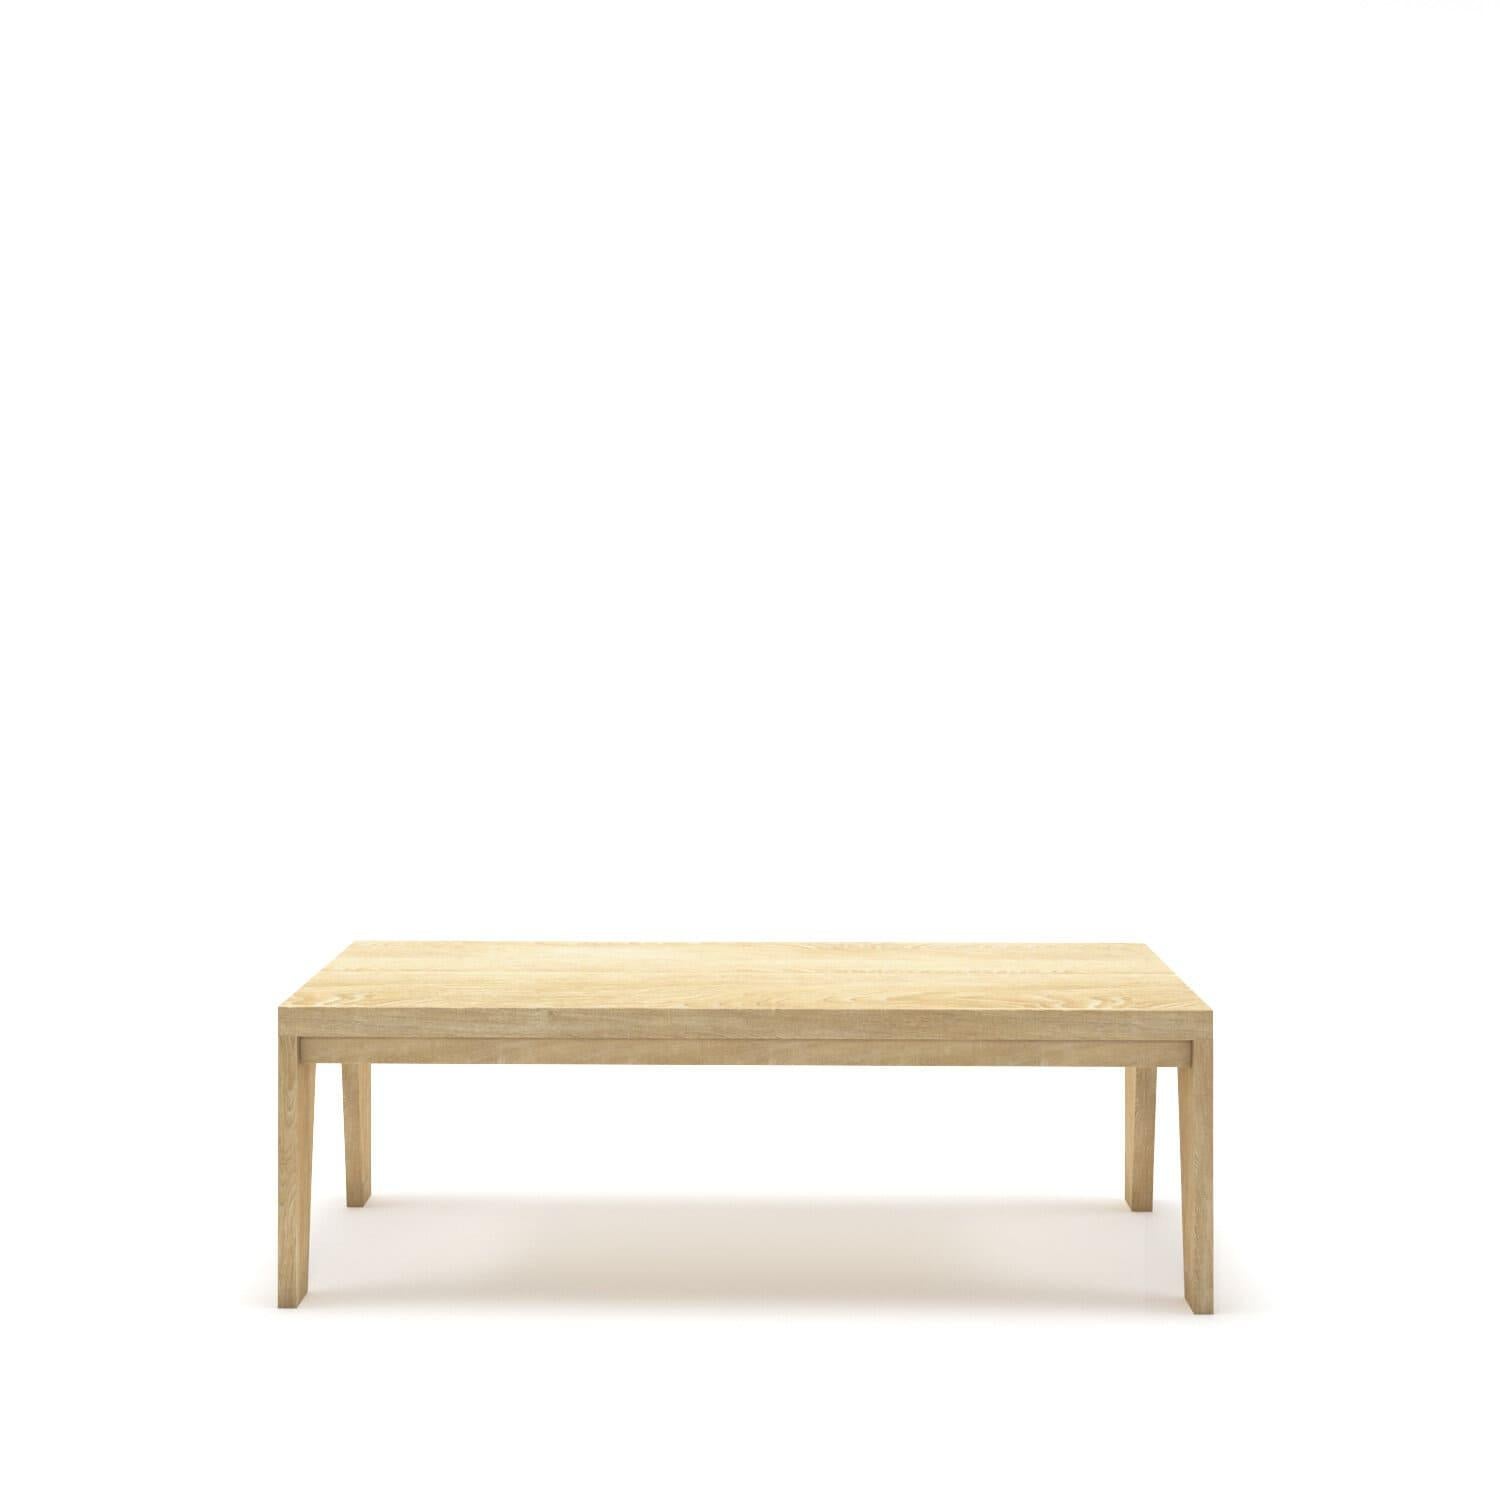 Experience the natural beauty of the Enn bench crafted from massive oak wood. Enjoy its design and sturdy construction, perfect for any space. Make a statement with the Enn bench--it’s sure to make a lasting impression!

All Tektōn pieces are made